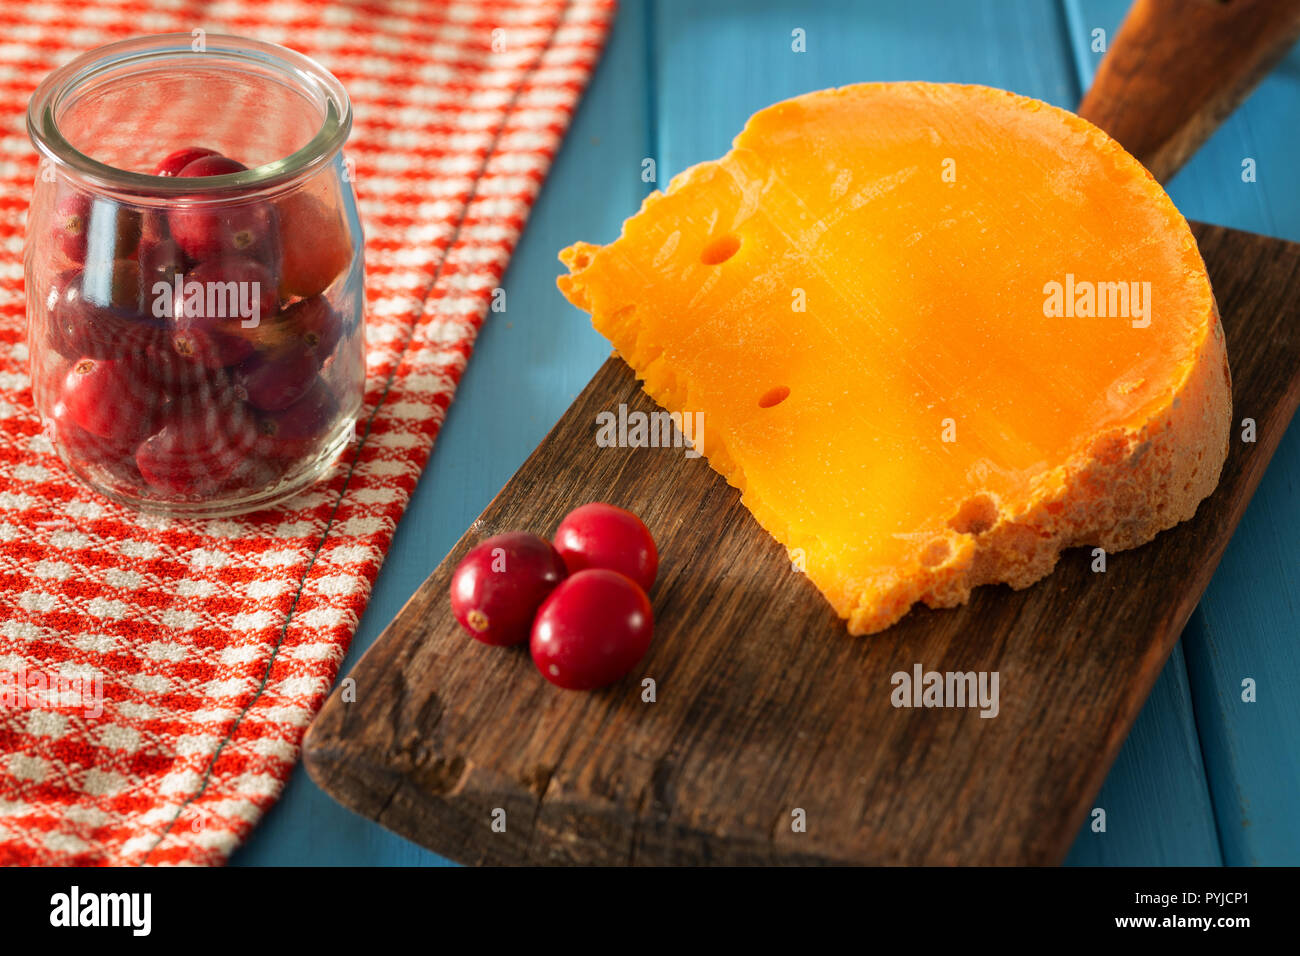 Mimolette,  type of cheese together with the addition of bread and fresh cranberries Stock Photo